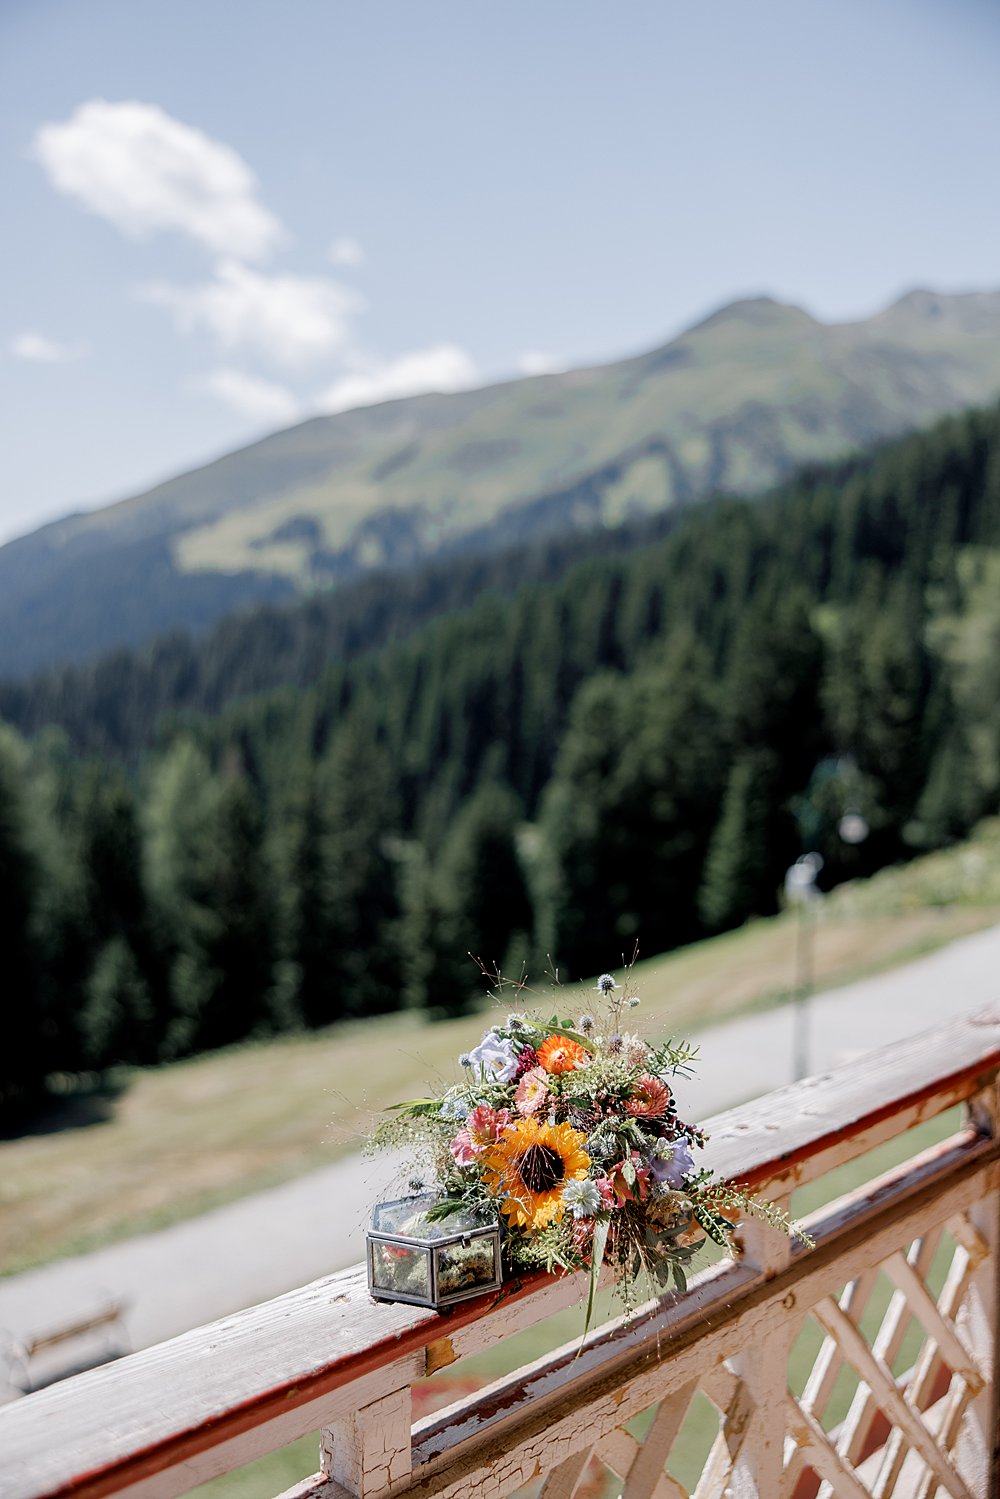 Swiss Alps Destination Wedding; The Tailors Photo and Films; international destination wedding photography and film;